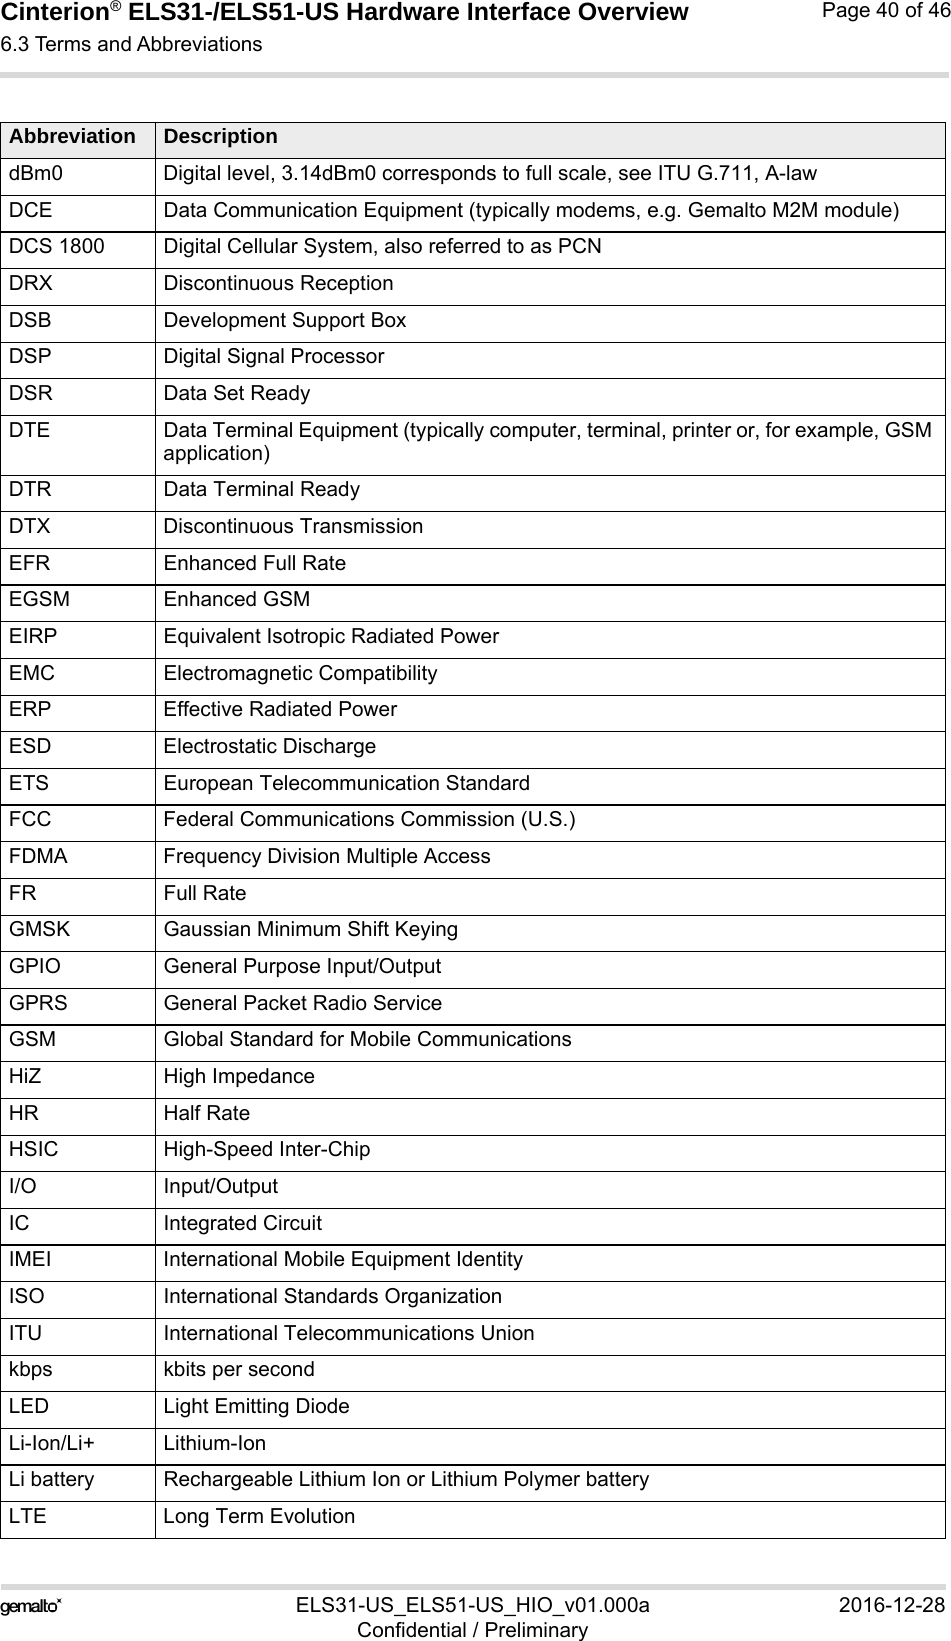 Cinterion® ELS31-/ELS51-US Hardware Interface Overview6.3 Terms and Abbreviations43ELS31-US_ELS51-US_HIO_v01.000a 2016-12-28Confidential / PreliminaryPage 40 of 46dBm0 Digital level, 3.14dBm0 corresponds to full scale, see ITU G.711, A-lawDCE Data Communication Equipment (typically modems, e.g. Gemalto M2M module)DCS 1800 Digital Cellular System, also referred to as PCNDRX Discontinuous ReceptionDSB Development Support BoxDSP Digital Signal ProcessorDSR Data Set ReadyDTE Data Terminal Equipment (typically computer, terminal, printer or, for example, GSM application)DTR Data Terminal ReadyDTX Discontinuous TransmissionEFR Enhanced Full RateEGSM Enhanced GSMEIRP Equivalent Isotropic Radiated PowerEMC Electromagnetic CompatibilityERP Effective Radiated PowerESD Electrostatic DischargeETS European Telecommunication StandardFCC Federal Communications Commission (U.S.)FDMA Frequency Division Multiple AccessFR Full RateGMSK Gaussian Minimum Shift KeyingGPIO General Purpose Input/OutputGPRS General Packet Radio ServiceGSM Global Standard for Mobile CommunicationsHiZ High ImpedanceHR Half RateHSIC High-Speed Inter-ChipI/O Input/OutputIC Integrated CircuitIMEI International Mobile Equipment IdentityISO International Standards OrganizationITU International Telecommunications Unionkbps kbits per secondLED Light Emitting DiodeLi-Ion/Li+ Lithium-IonLi battery Rechargeable Lithium Ion or Lithium Polymer batteryLTE Long Term EvolutionAbbreviation Description